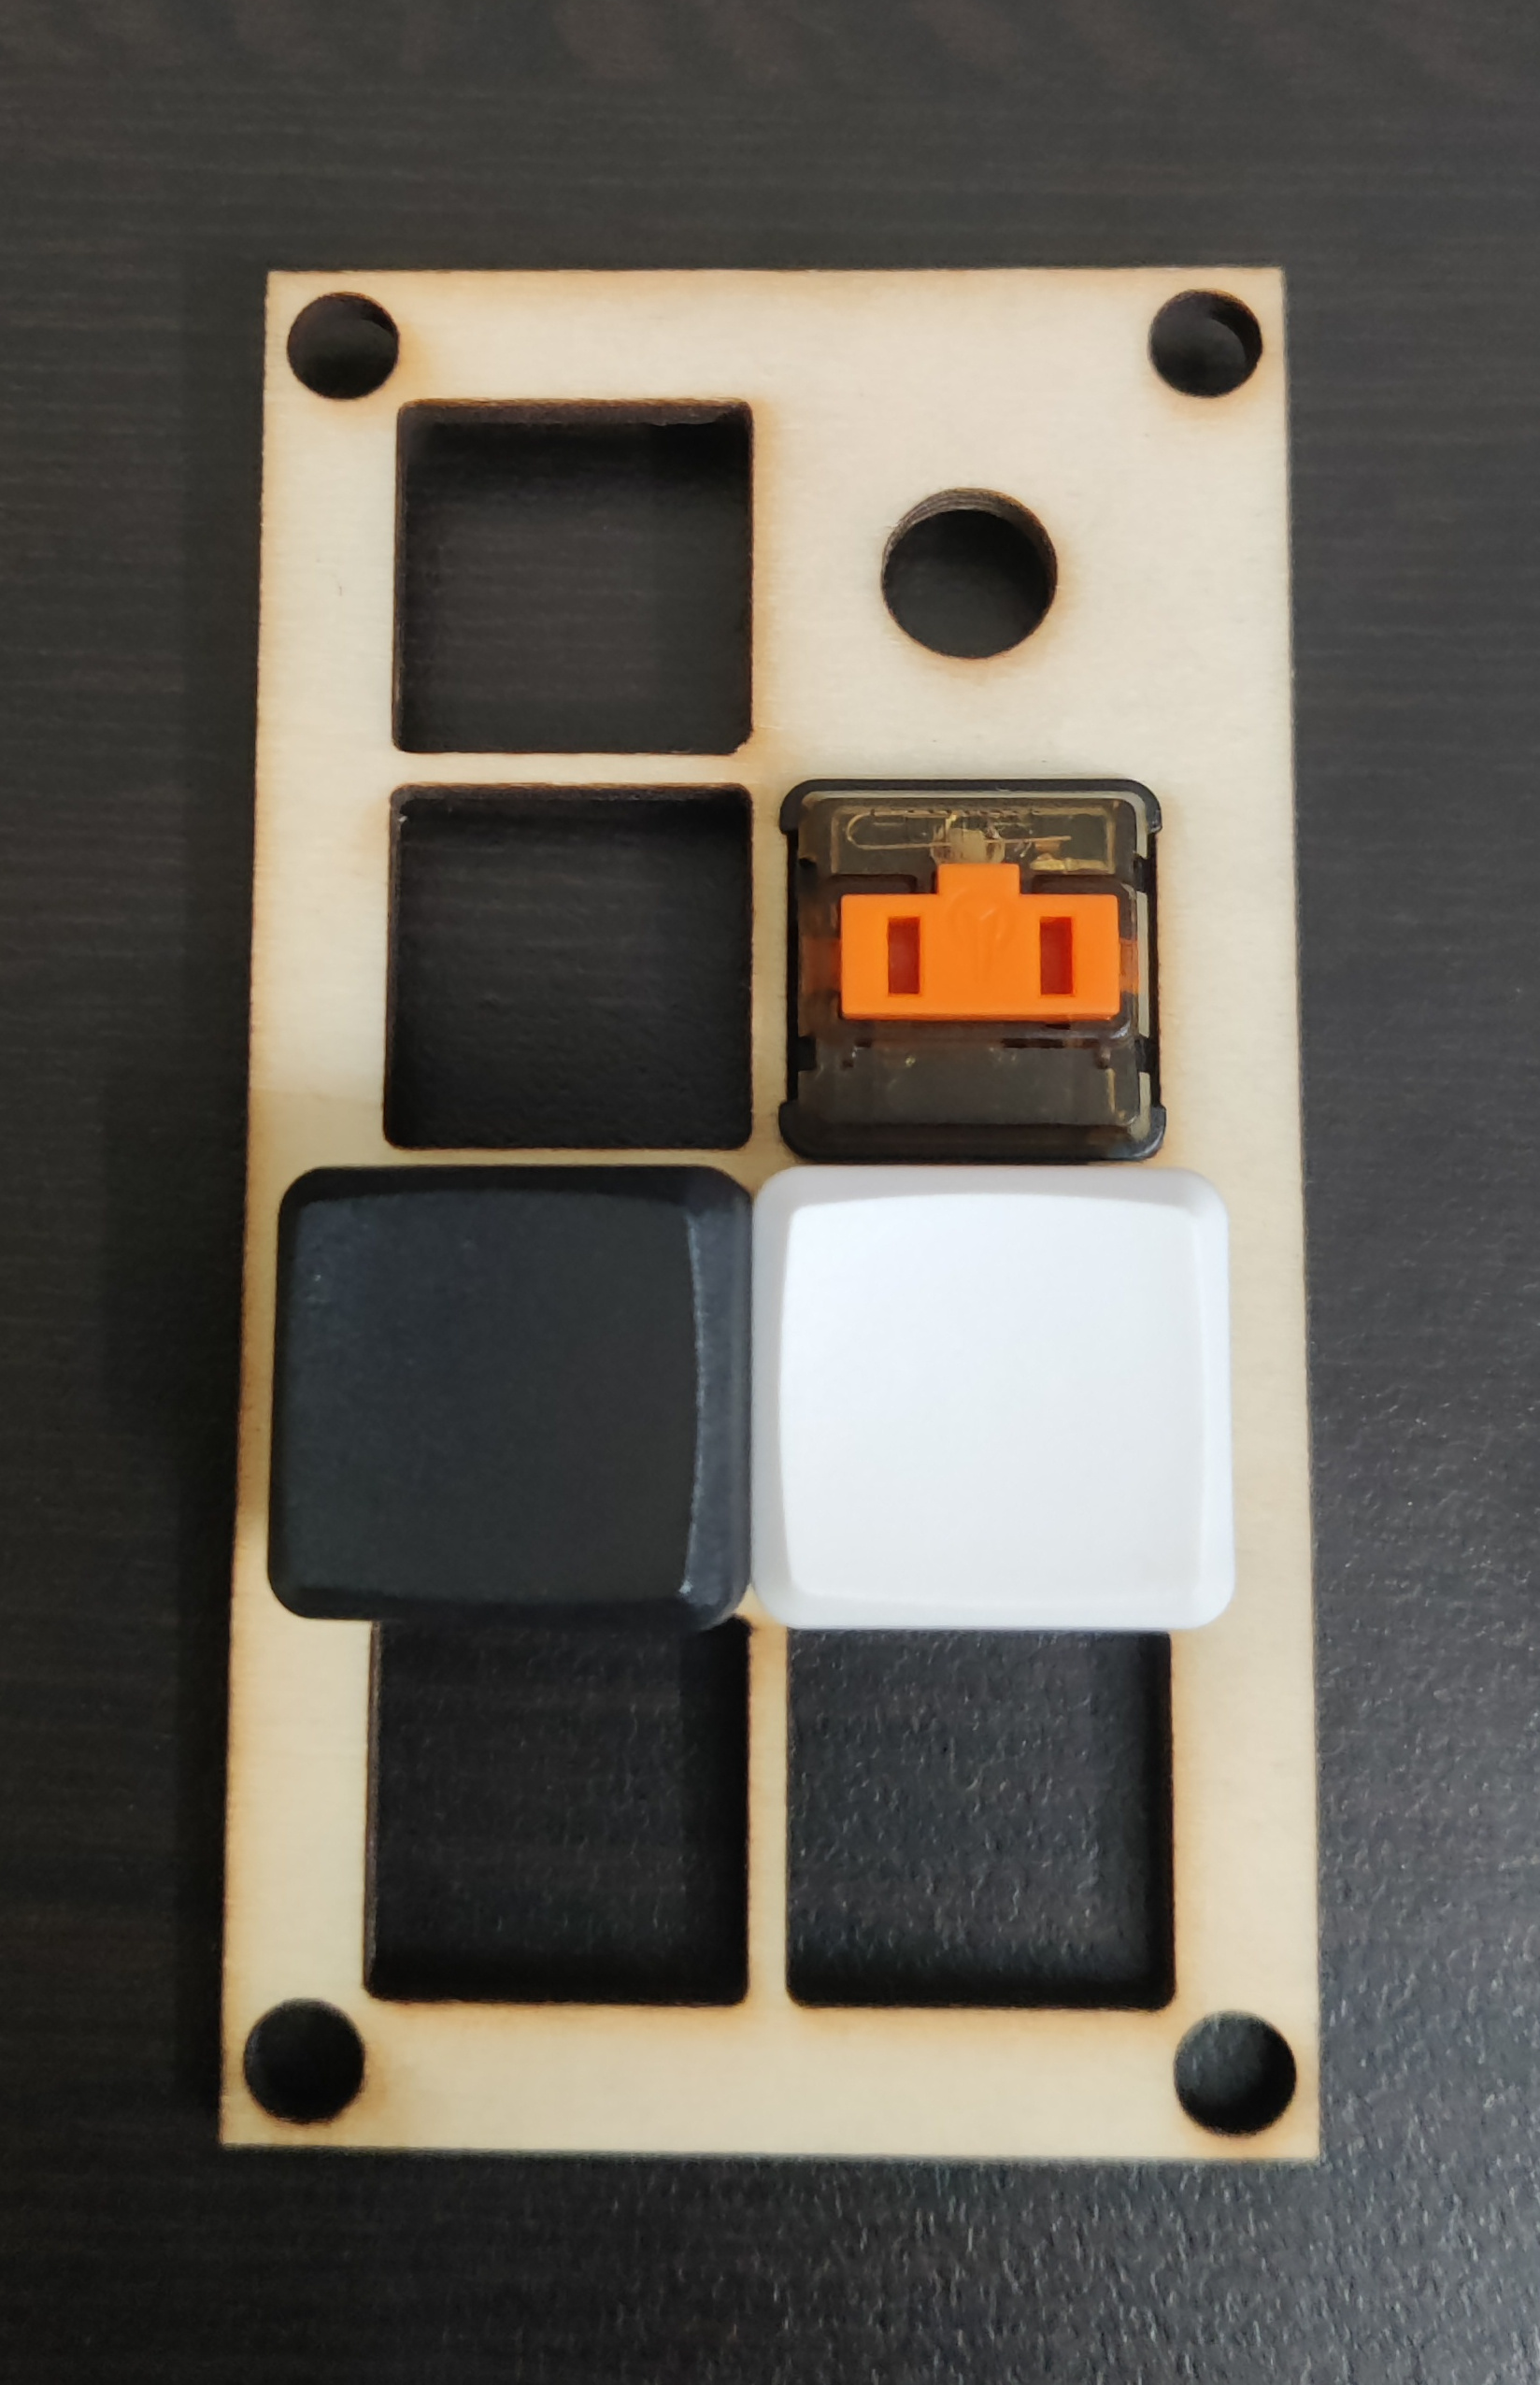 The v0 top plate, showing how there is not enough space between the keys on each row of the macropad.